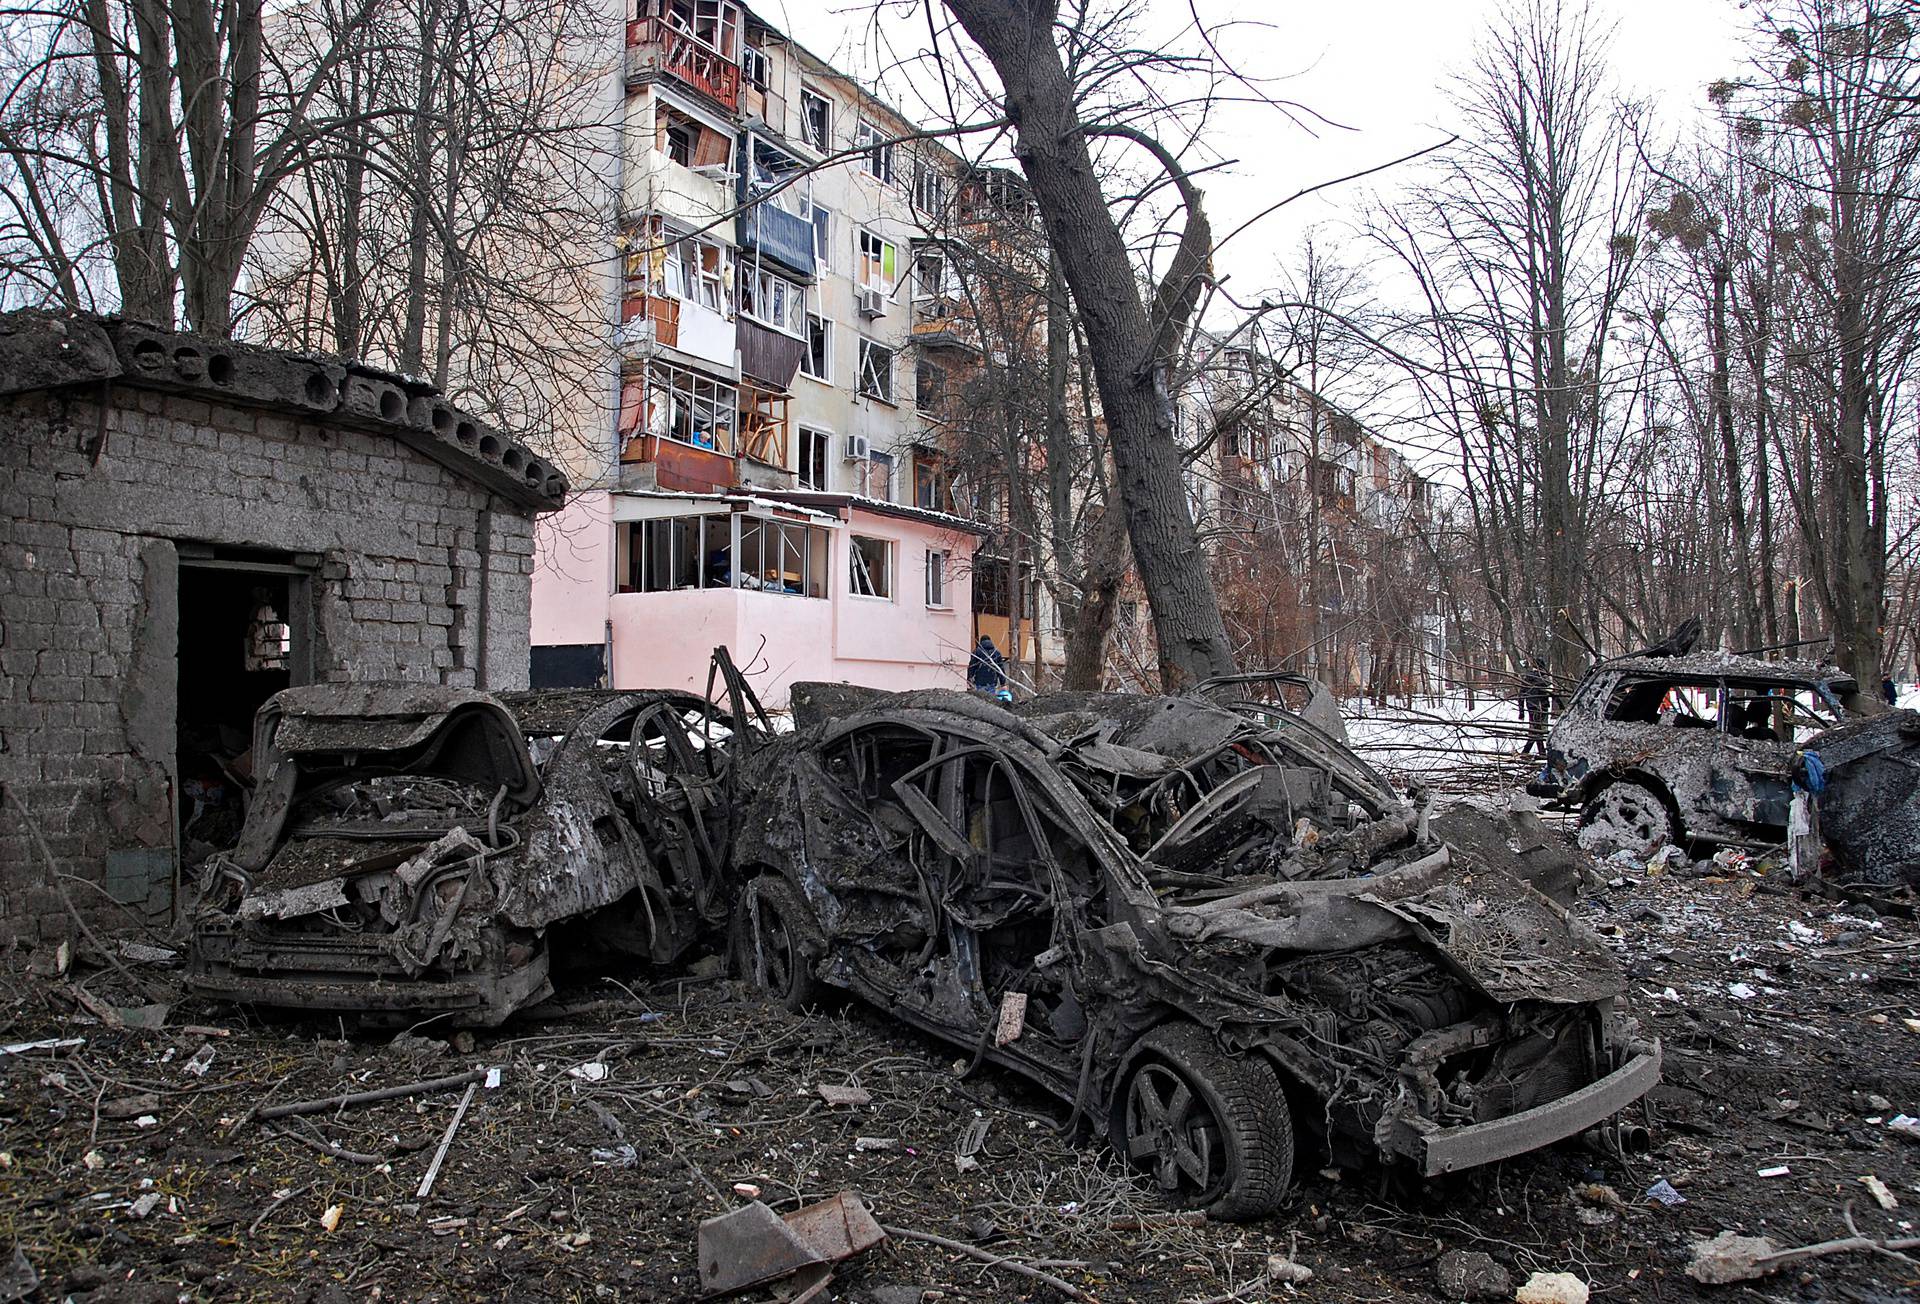 A view shows destroyed cars following recent shelling during Ukraine-Russia conflict in Kharkiv